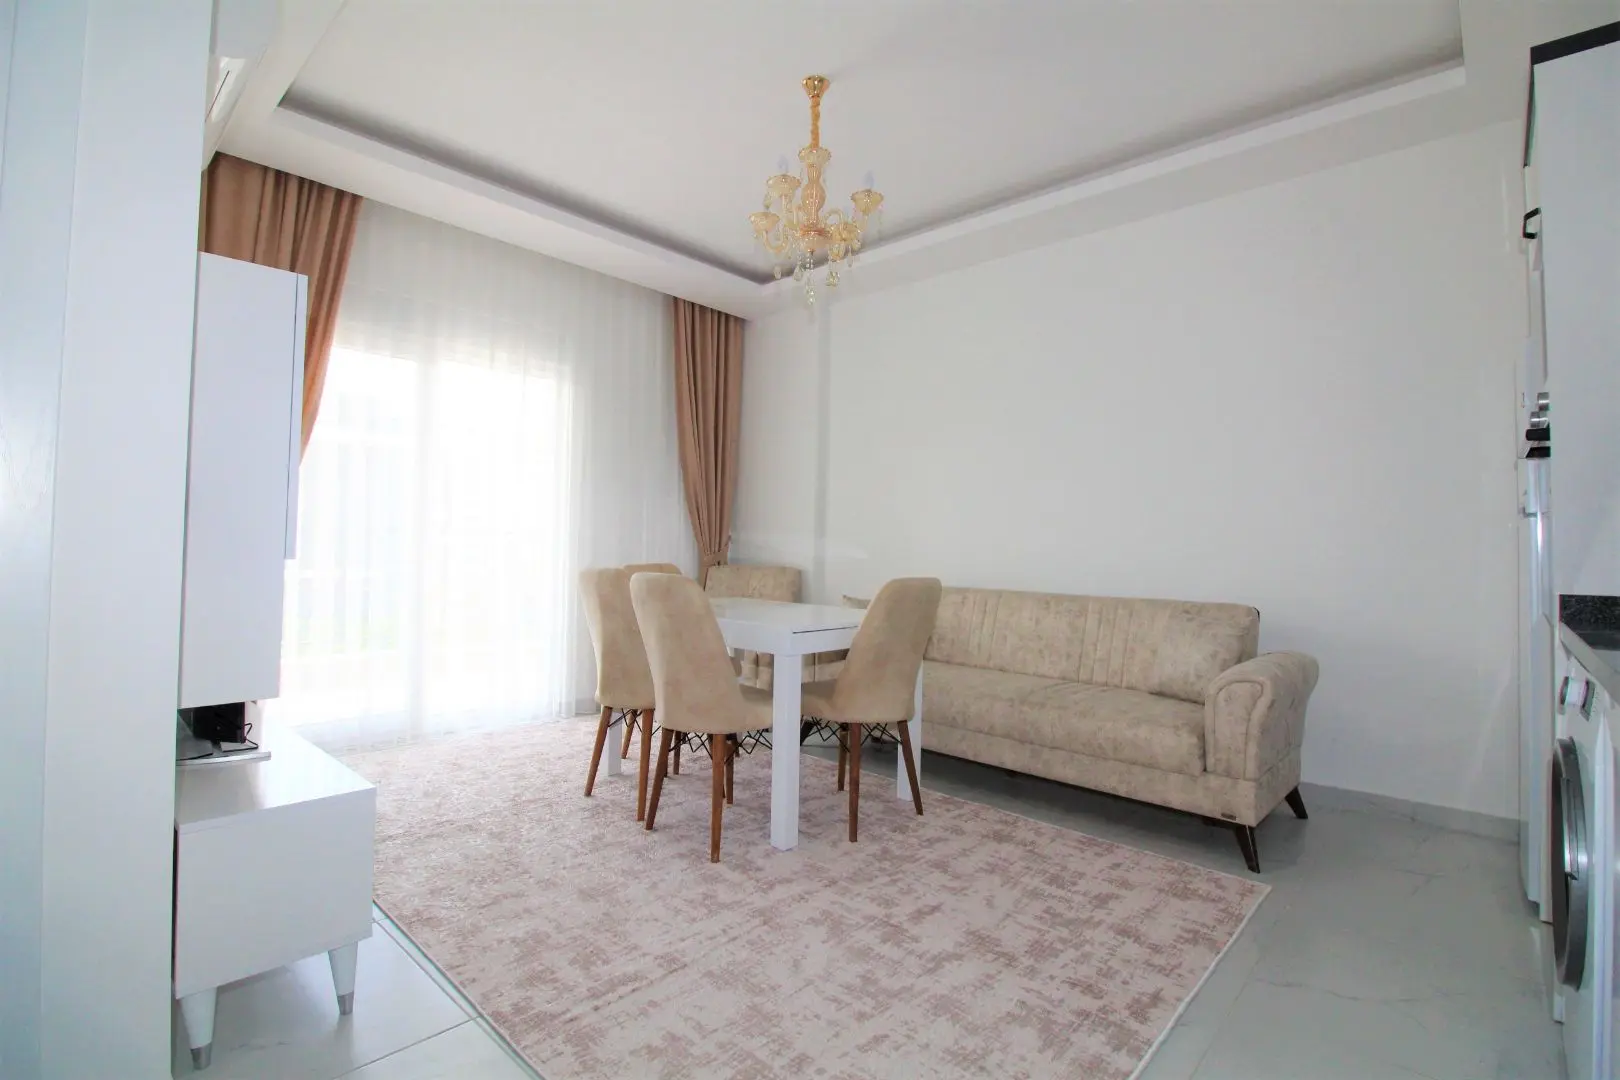 NEW AND FURNISHED 1+1 FLAT FOR RENT IN KARGICAK, ALANYA